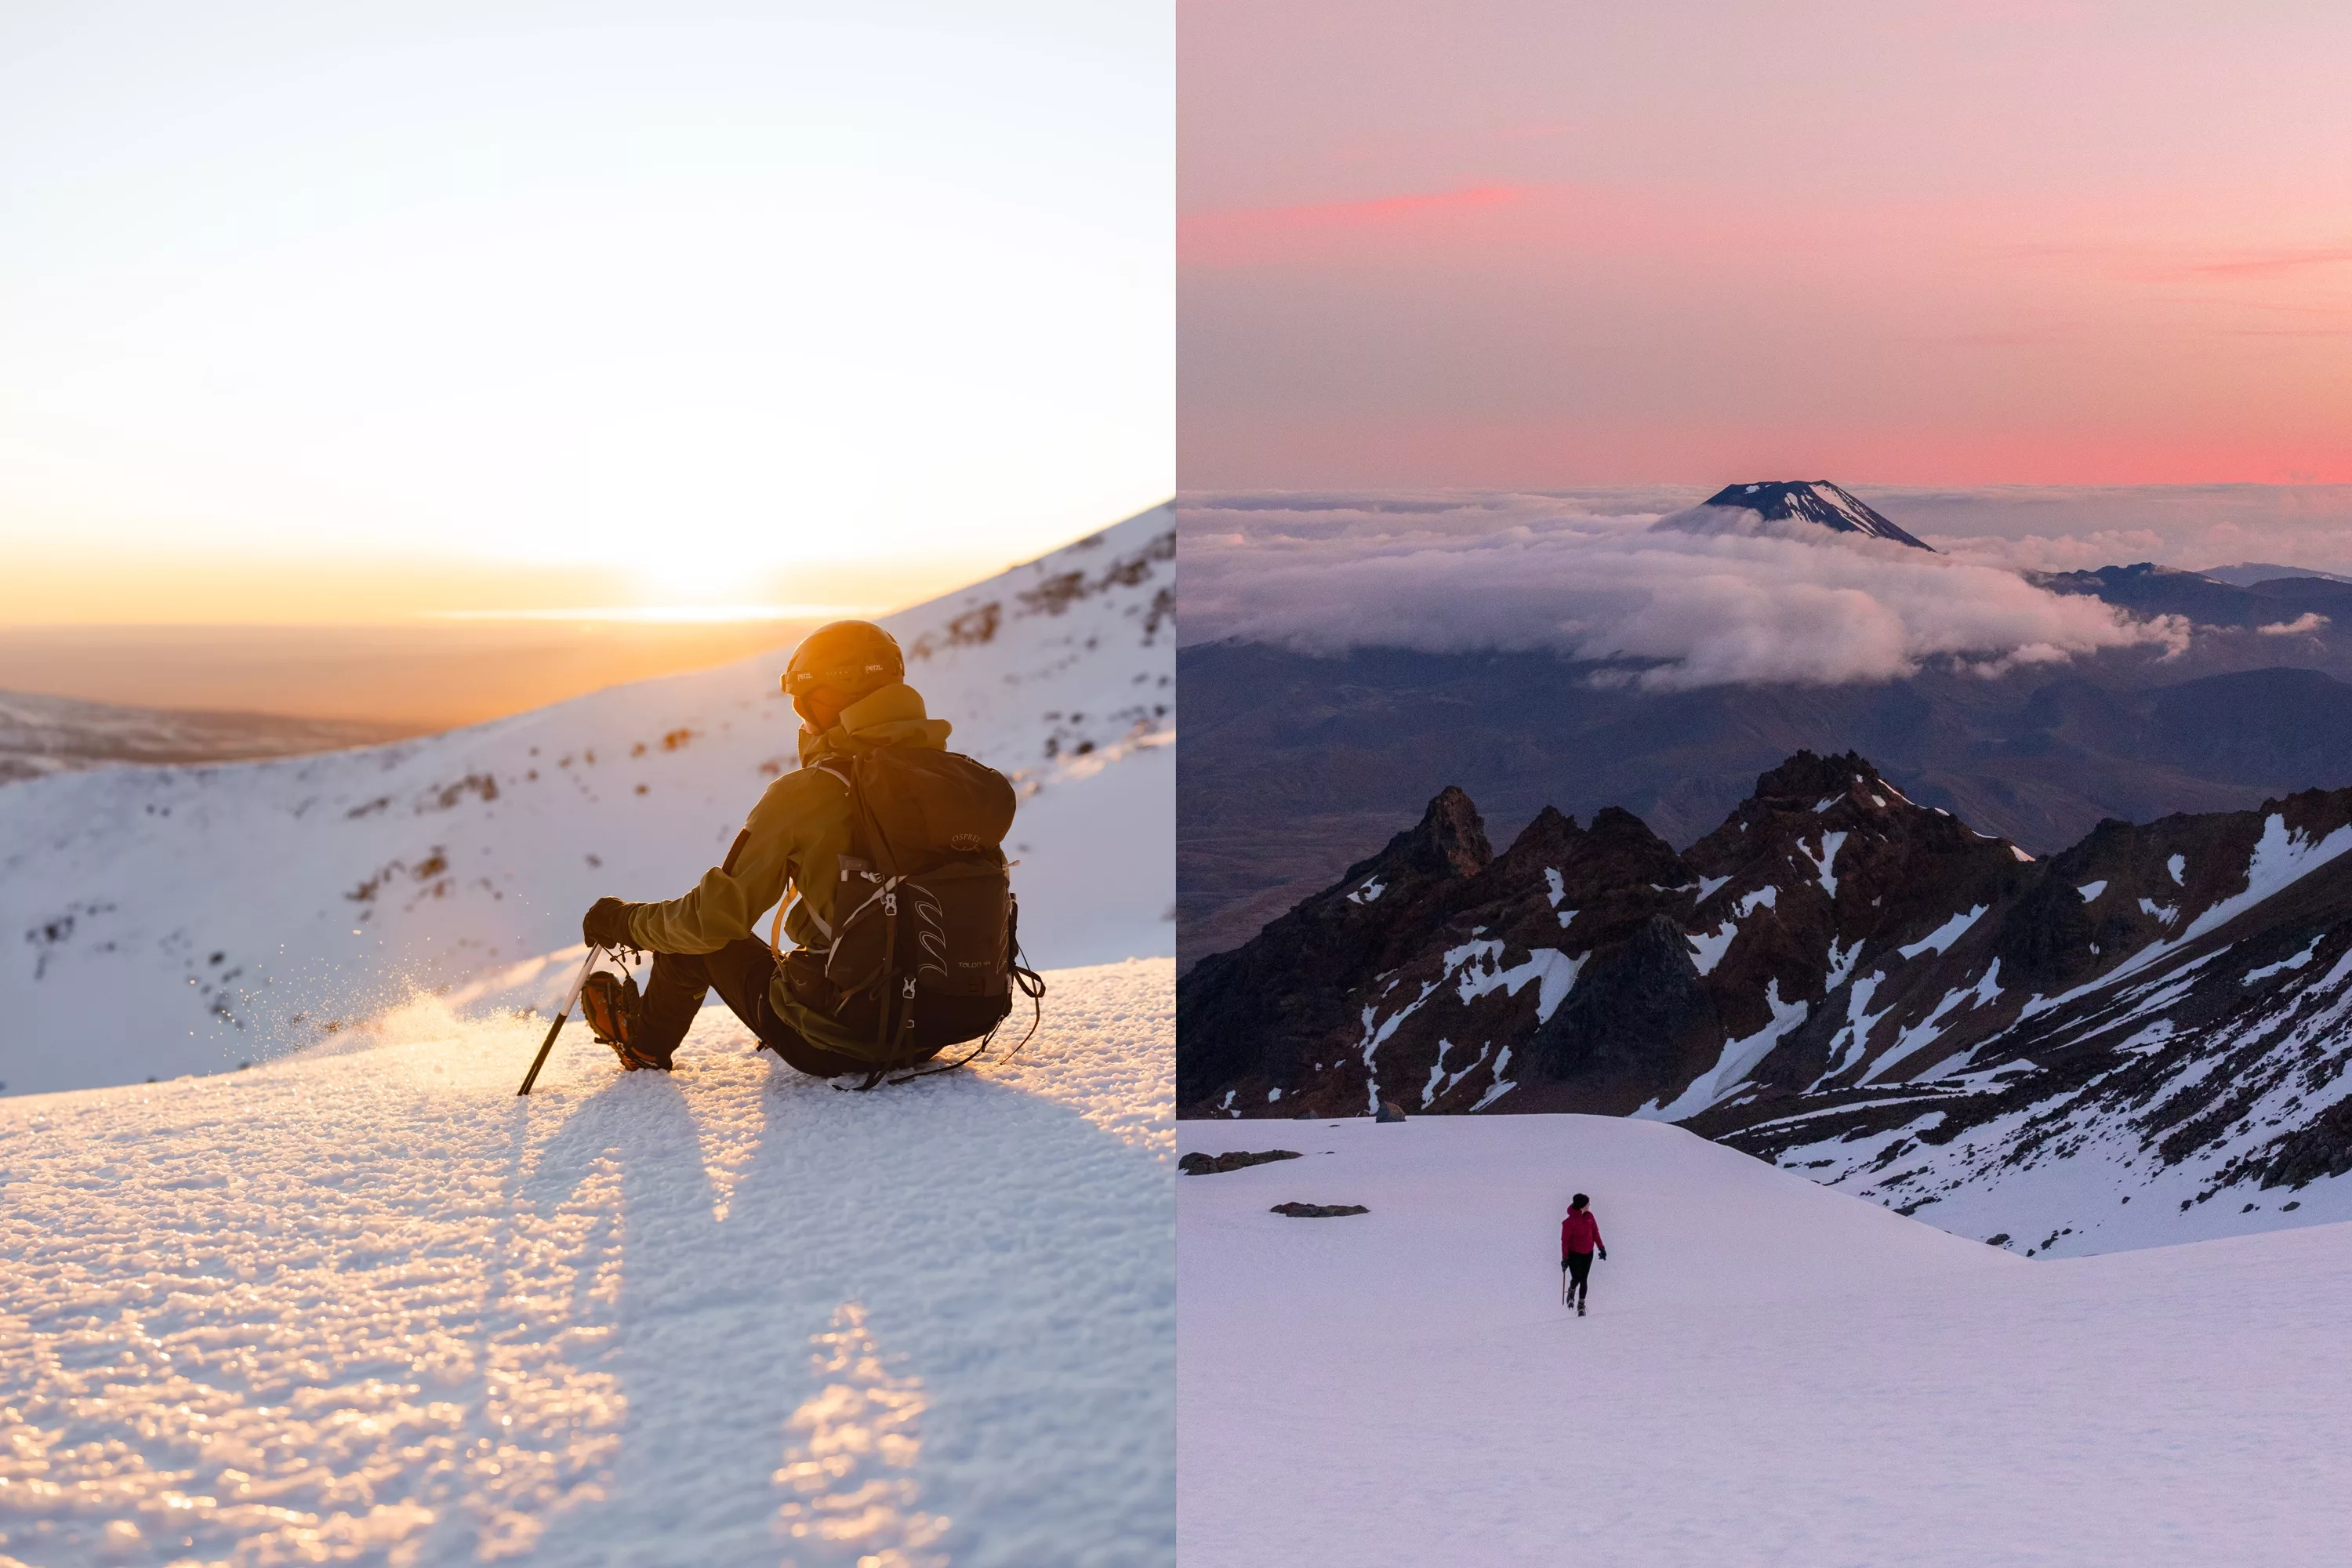 How to access the Mt Ruapehu summit in winter